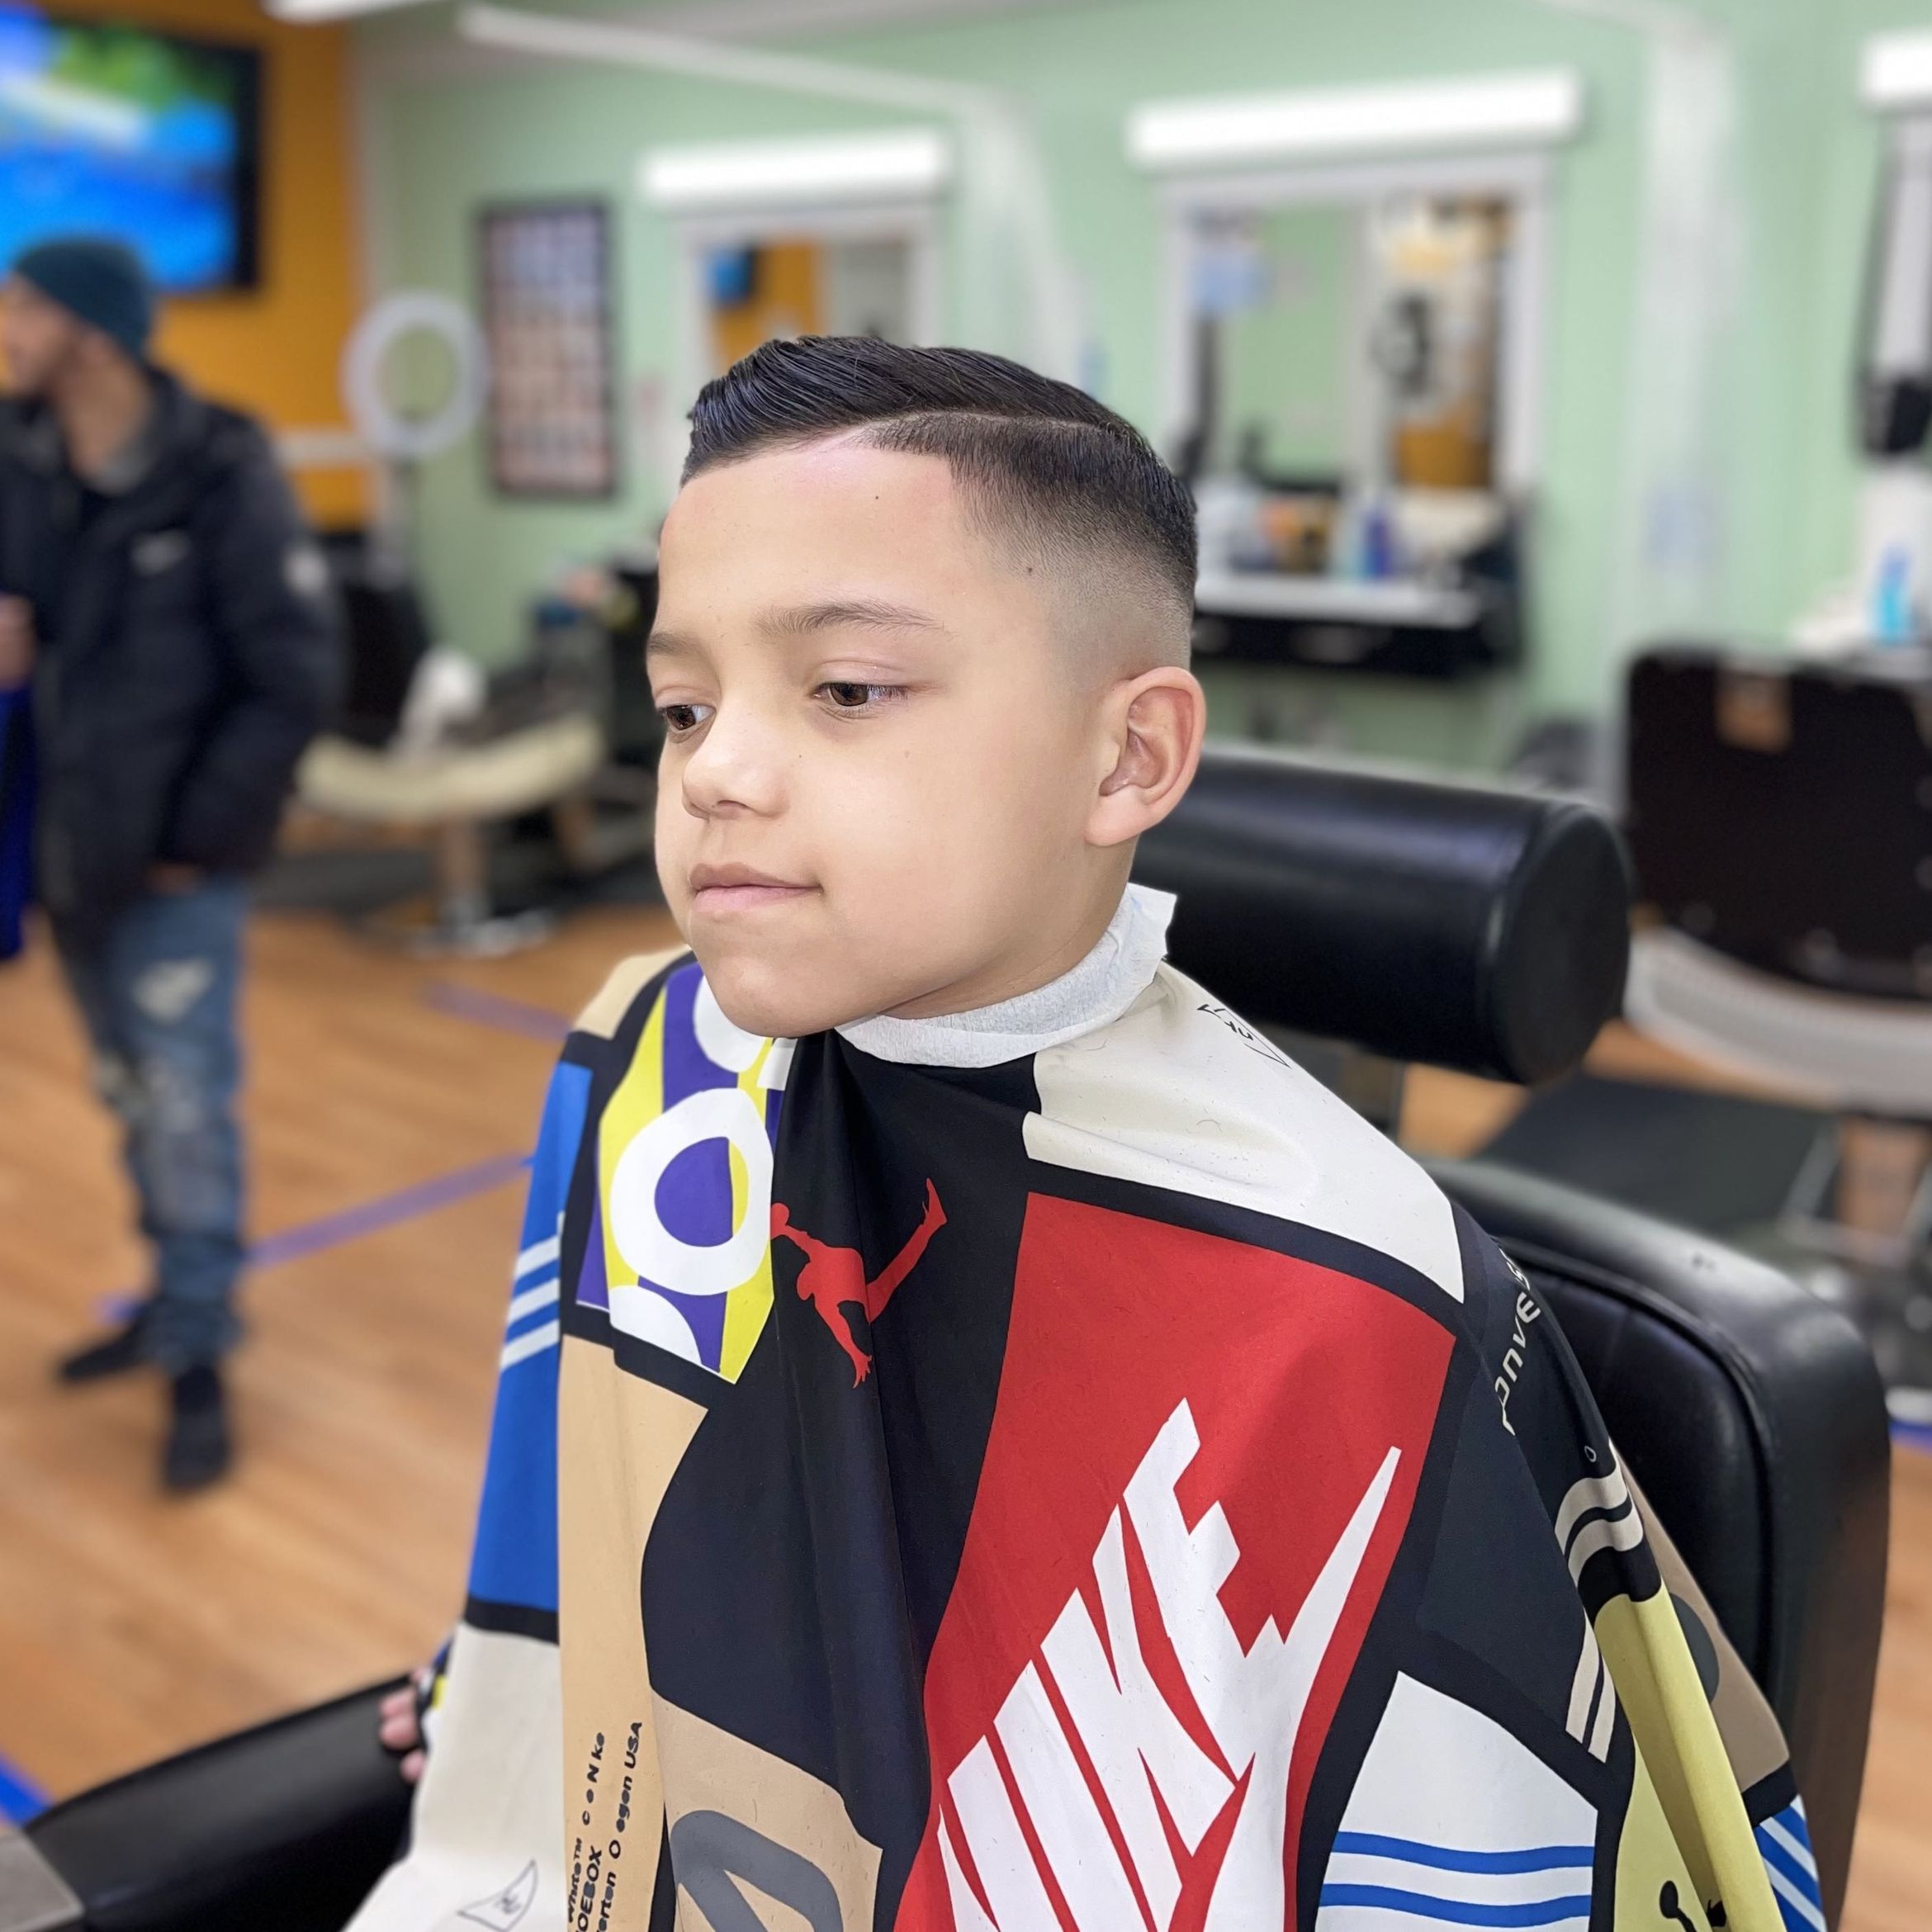 Kids under 10 years old. All type of  haircuts portfolio